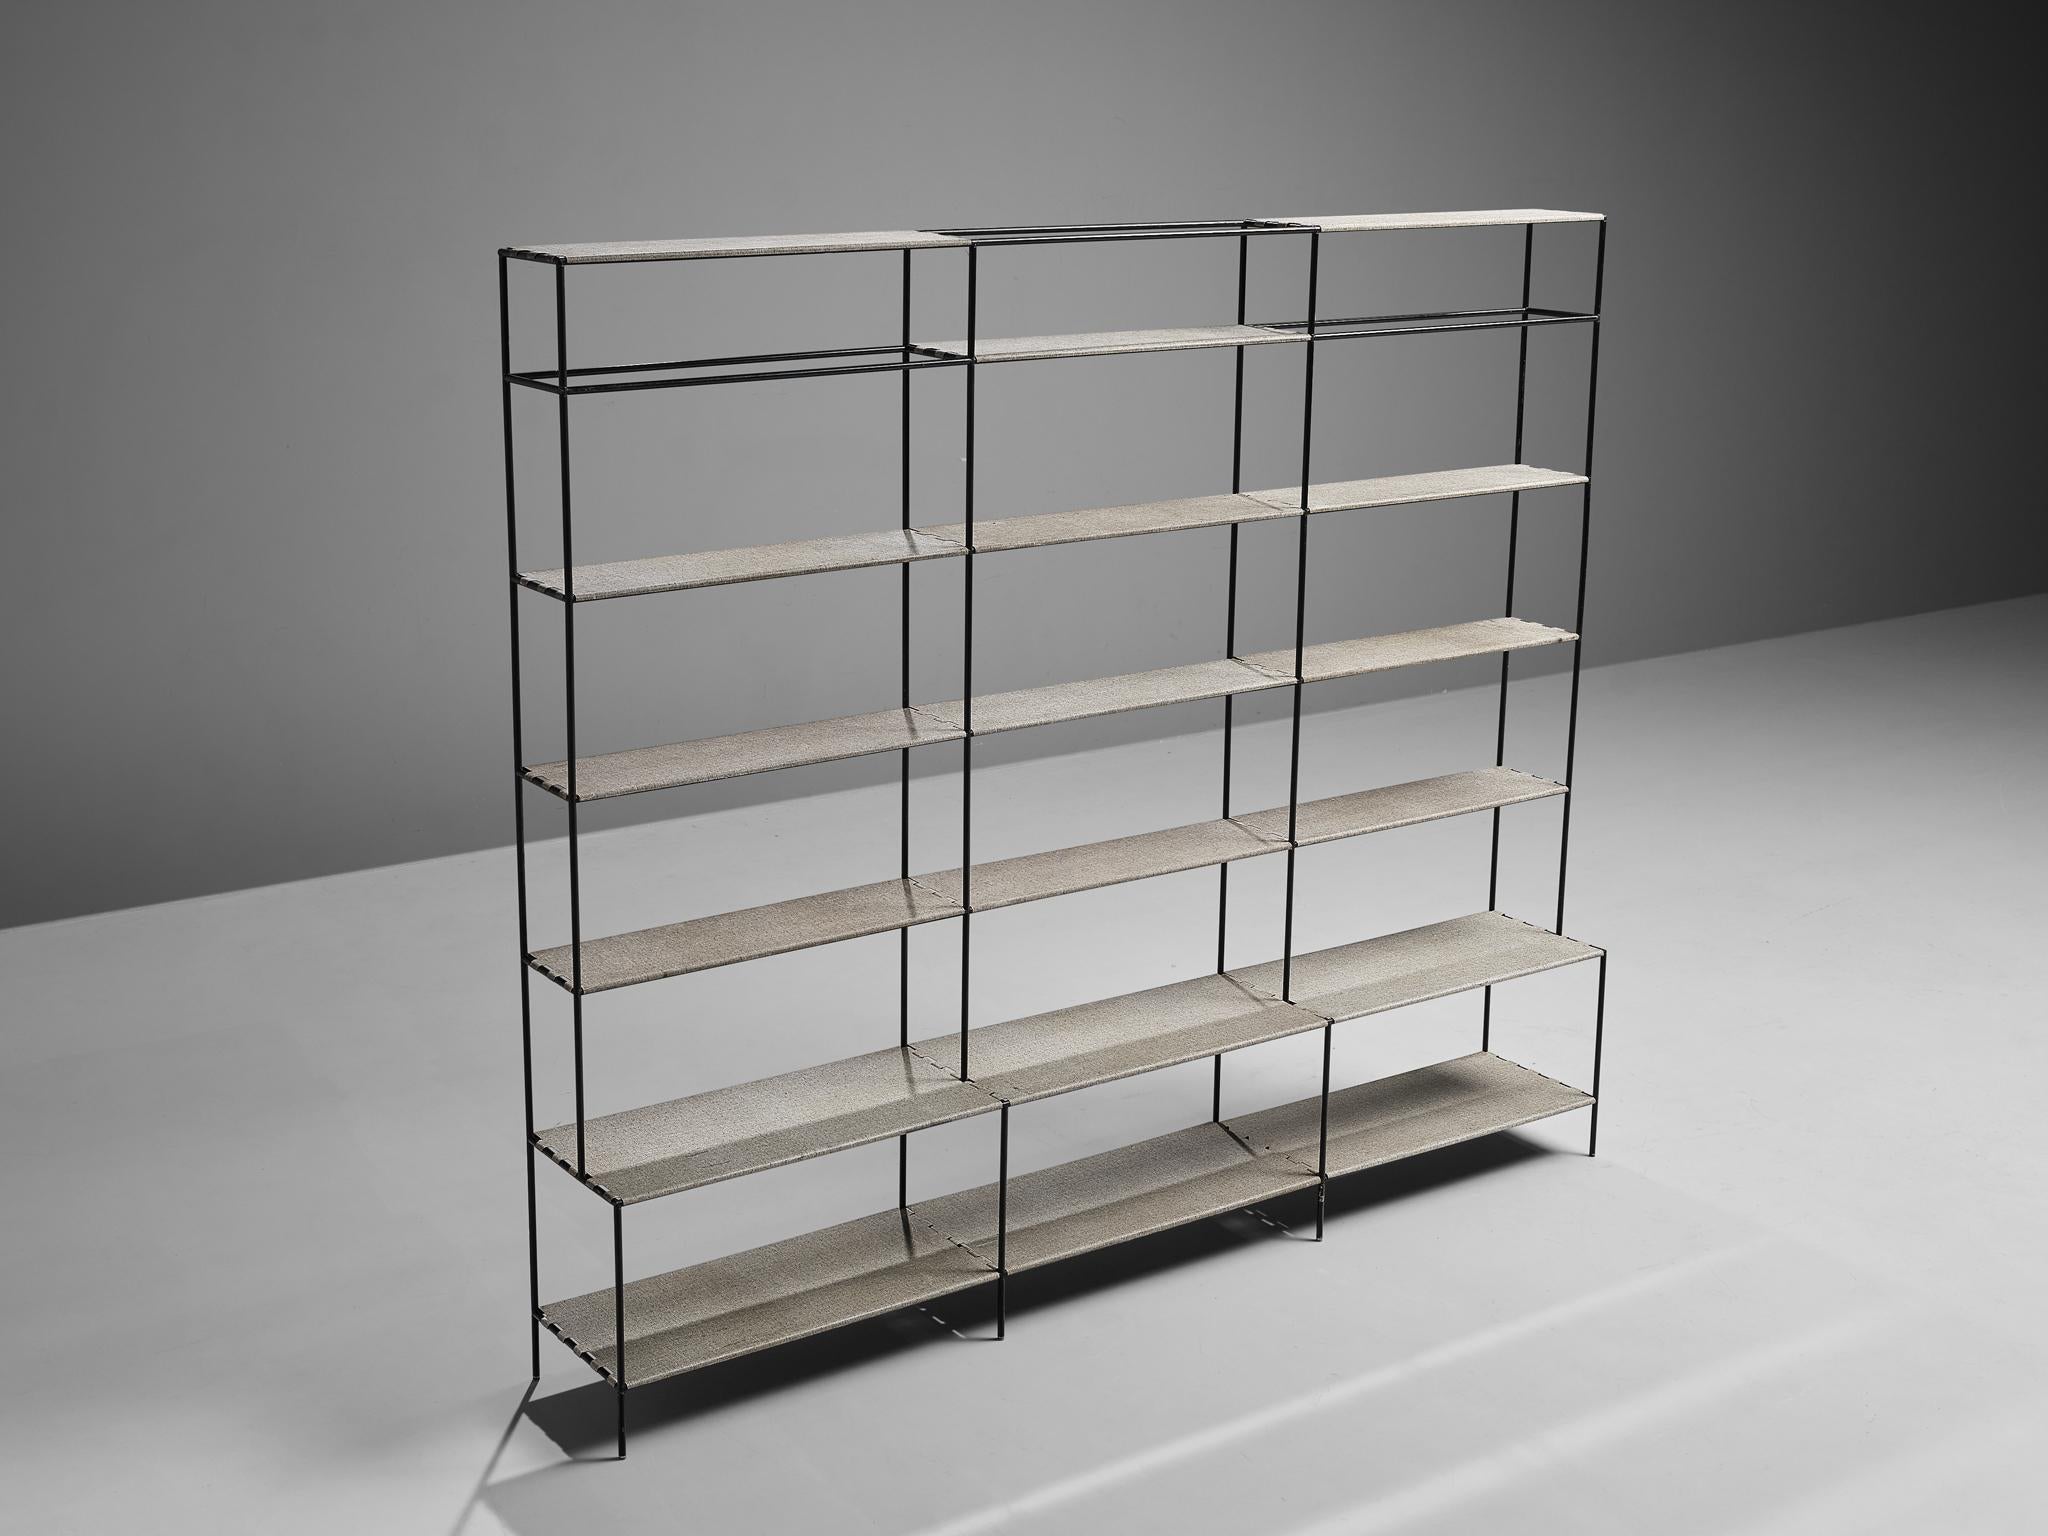 Poul Cadovius, open bookshelf or room divider, metal, Denmark, 1960s

This minimalist shelving unit was designed by Poul Cadovius. This shelving system exists of a thin frame in black metal to which shelves can be attached. Three open columns with a